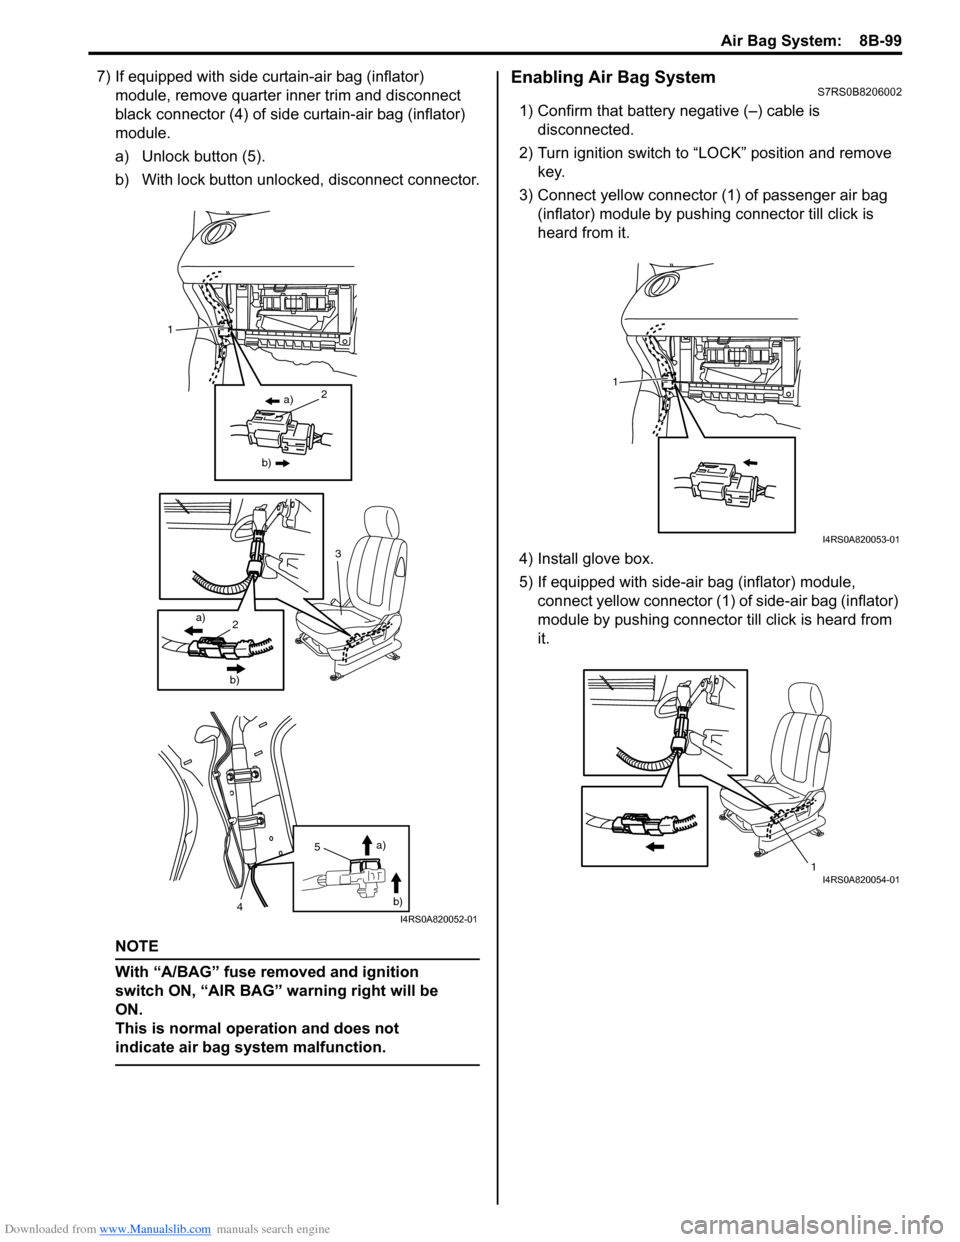 SUZUKI SWIFT 2006 2.G Service Service Manual Downloaded from www.Manualslib.com manuals search engine Air Bag System:  8B-99
7) If equipped with side curtain-air bag (inflator) module, remove quarter inner trim and disconnect 
black connector (4